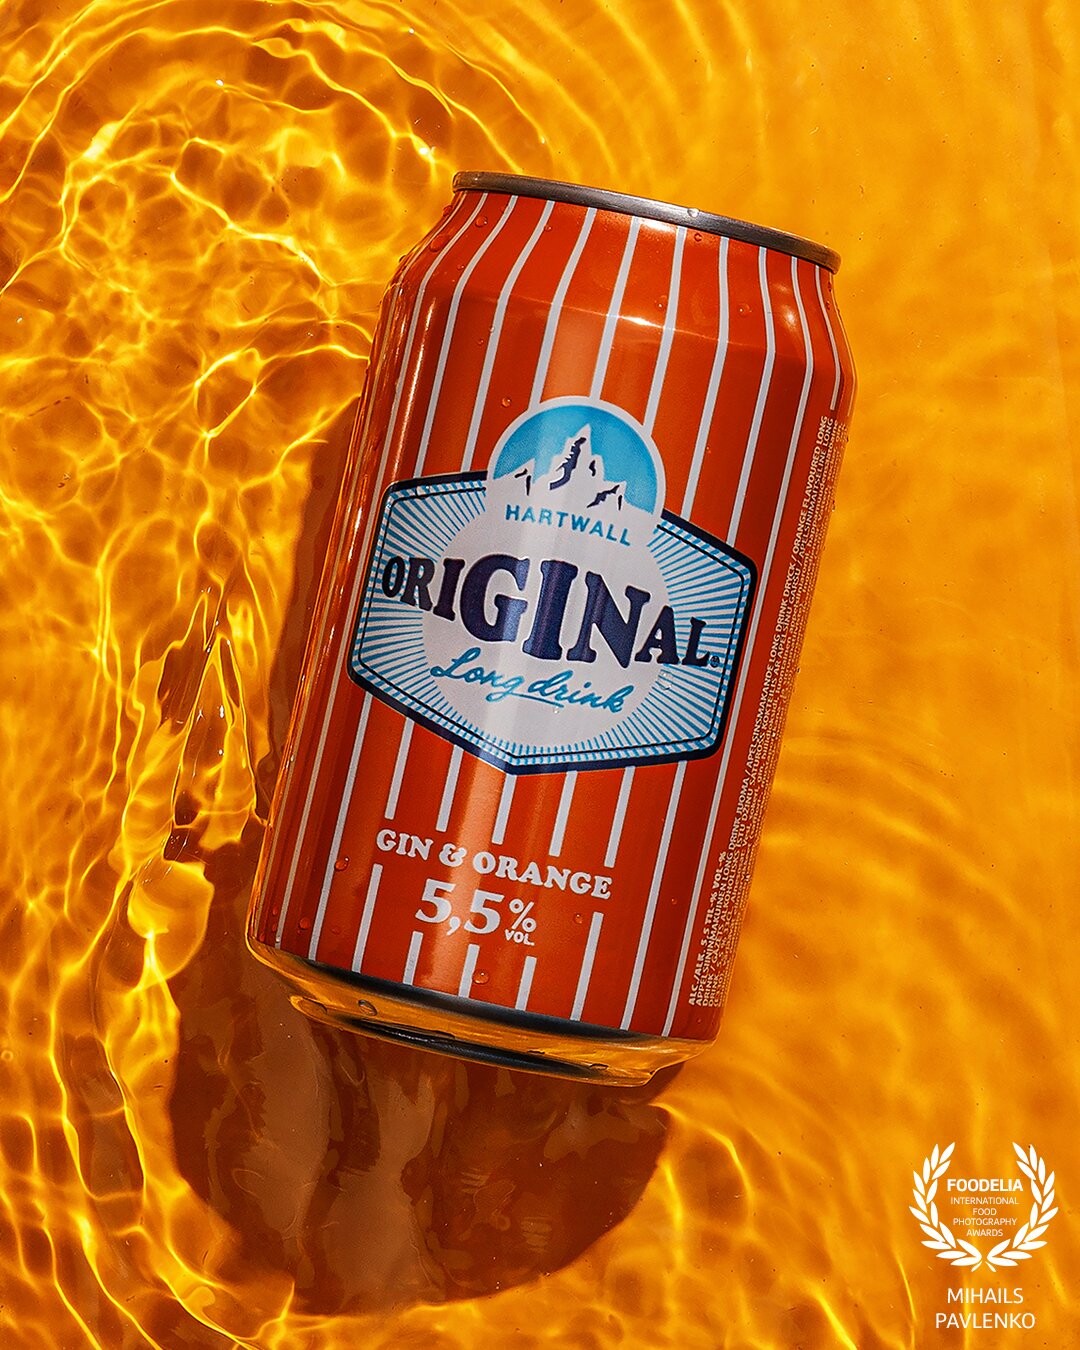 If it's hot, just try @originallongdrink drink. Photo shoot of the gin drink in a small bath. Big thanks to @originallongdrink.lv for the product.